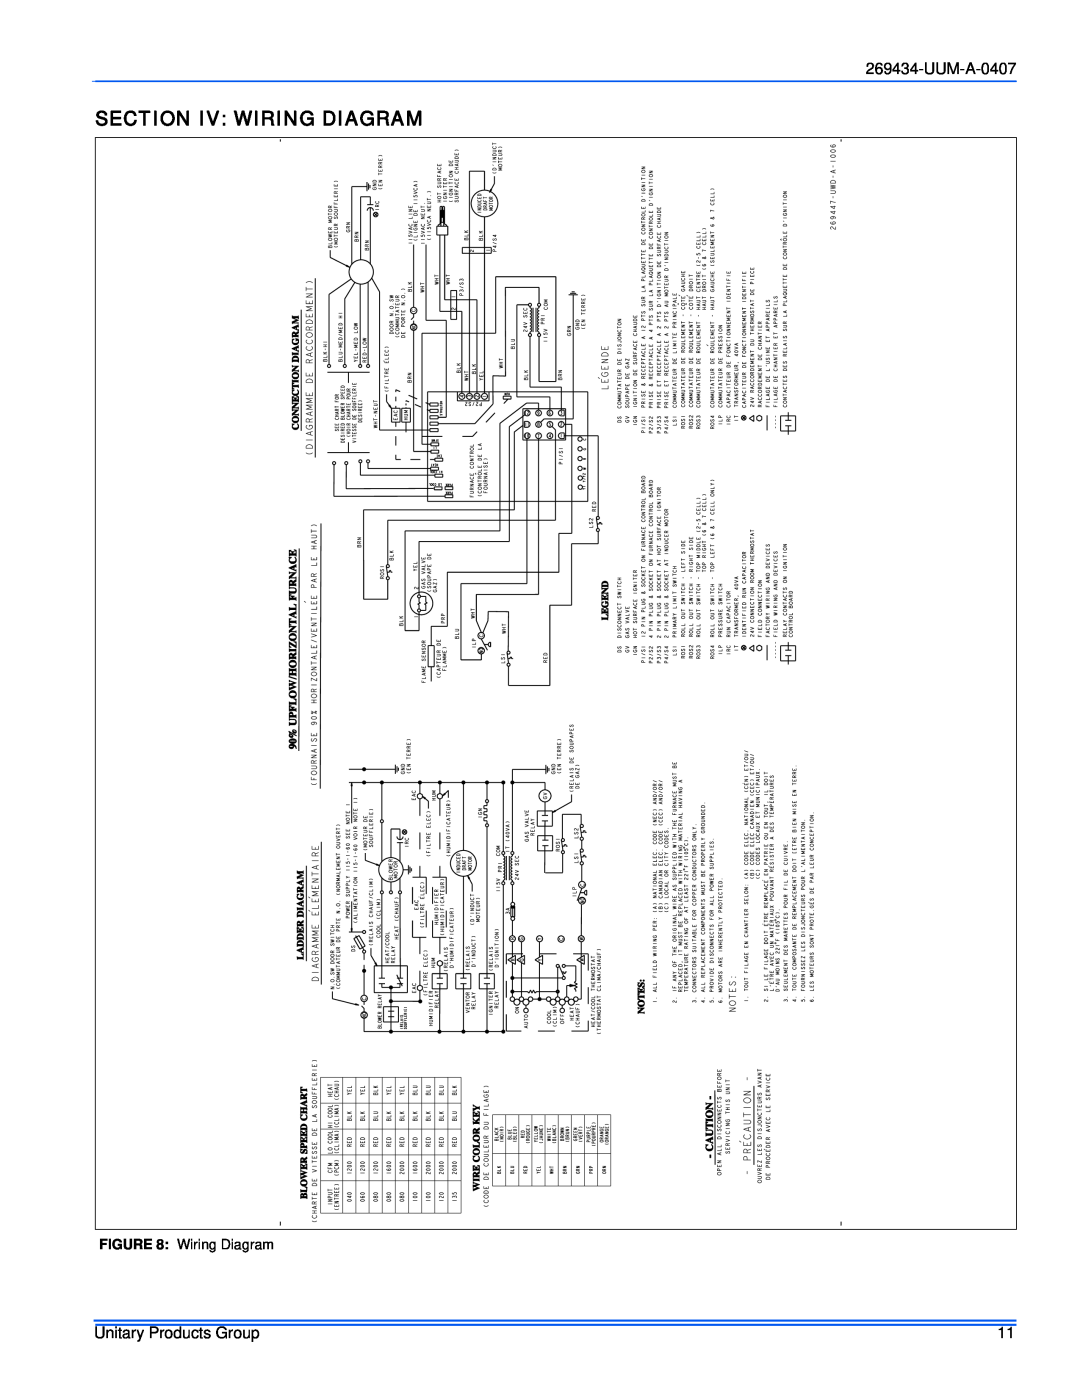 White Rodgers FC9s Up, FL9s UP, PS9 Up service manual Section Iv Wiring Diagram, UUM-A-0407, Unitary Products Group 